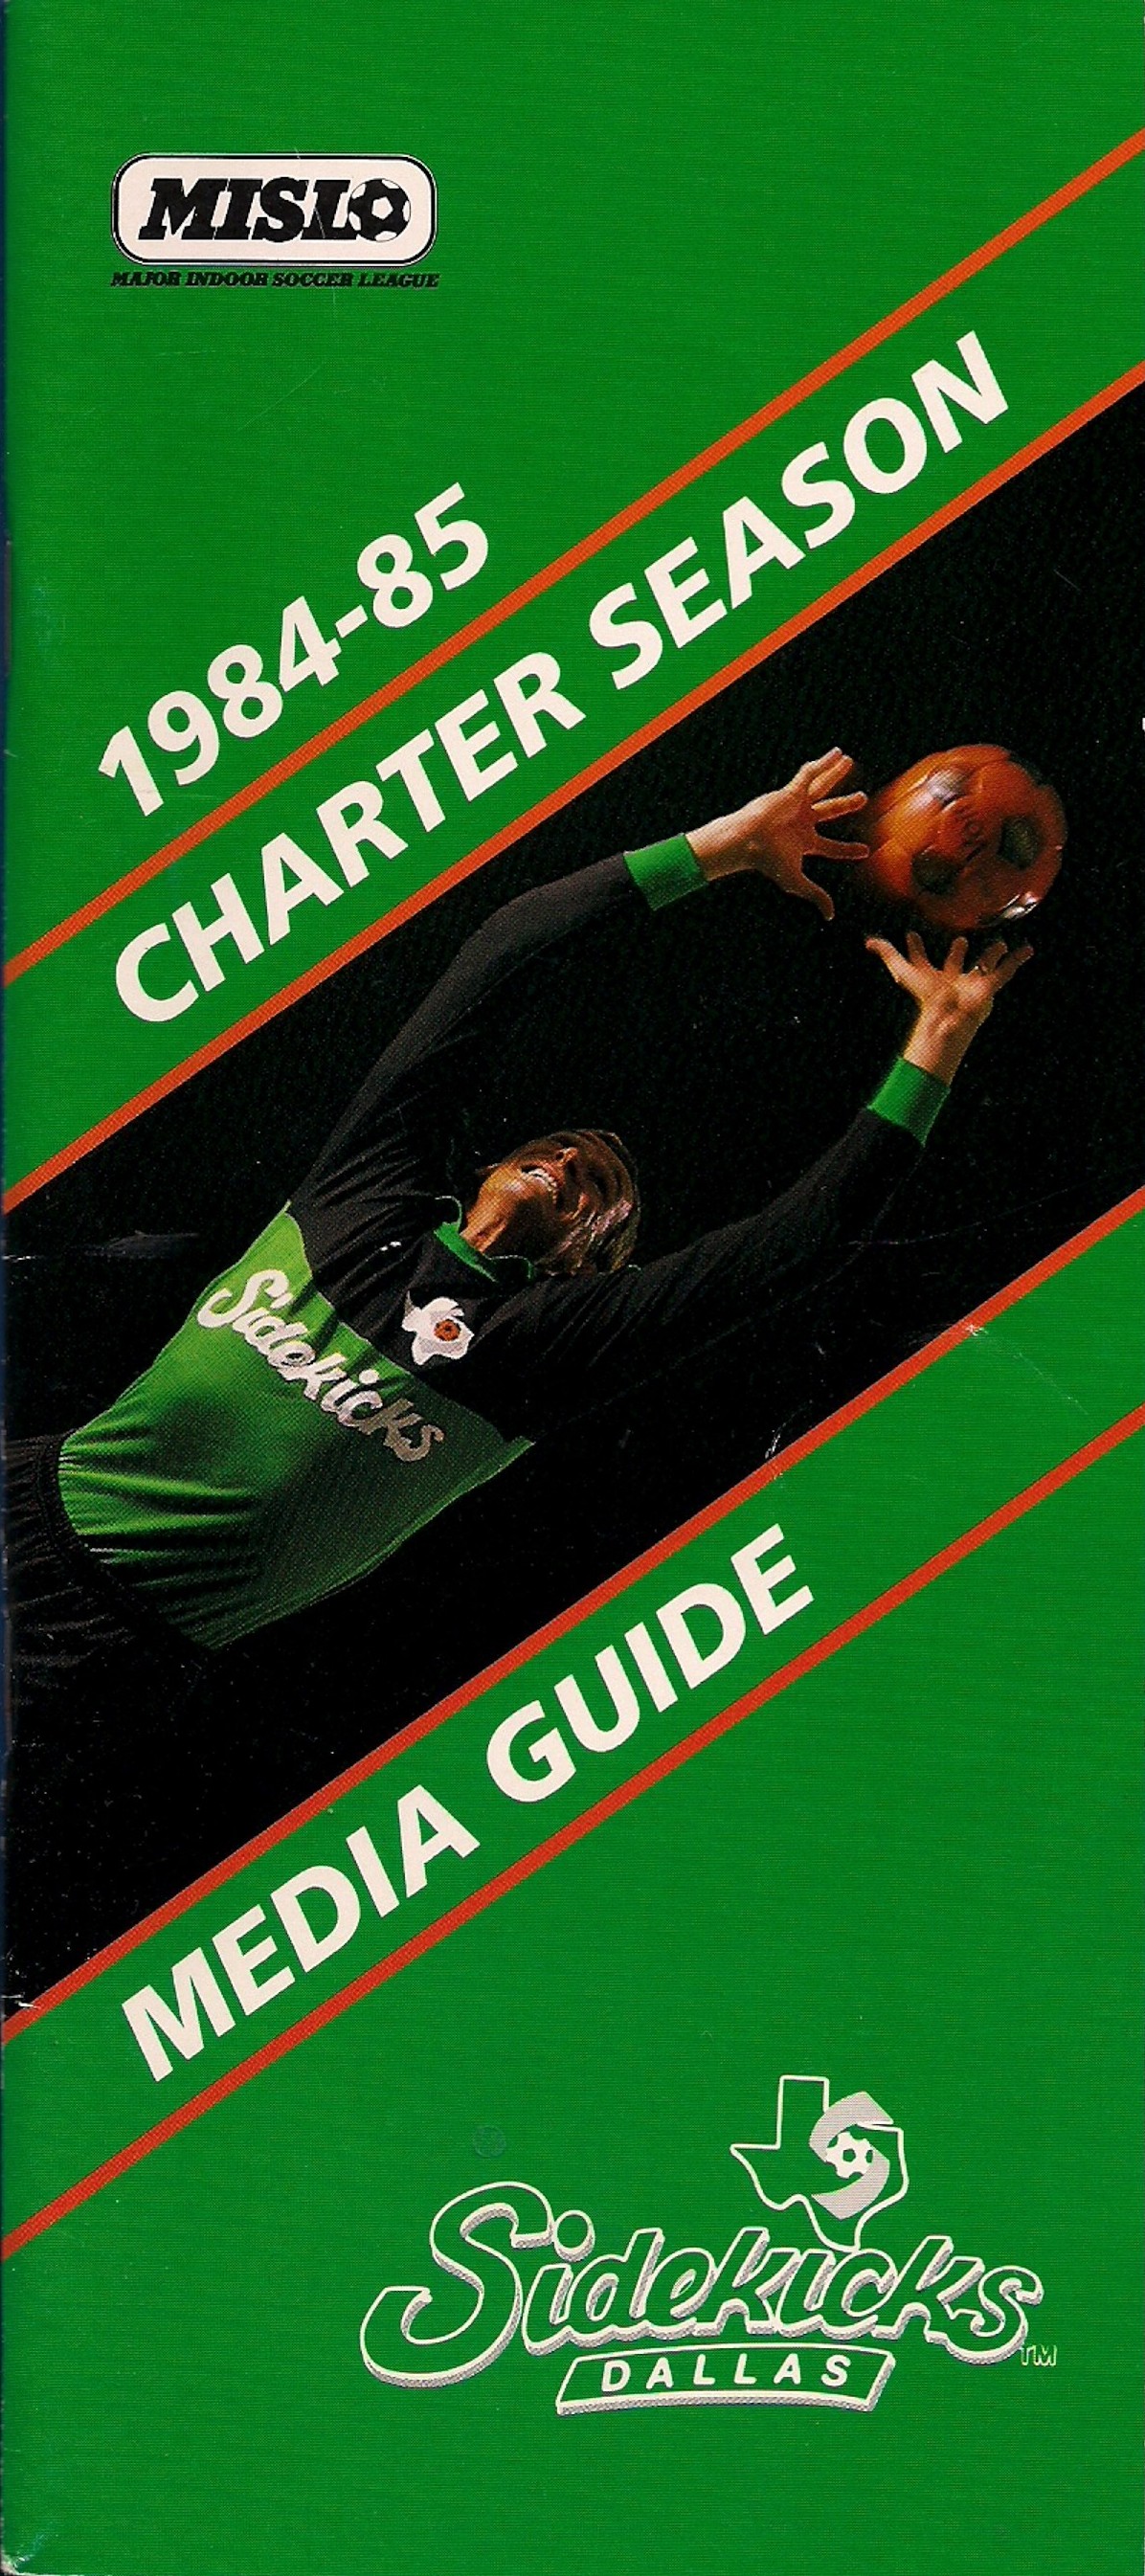 OTD (11.8.98): On this day, the Dallas Sidekicks were crowned